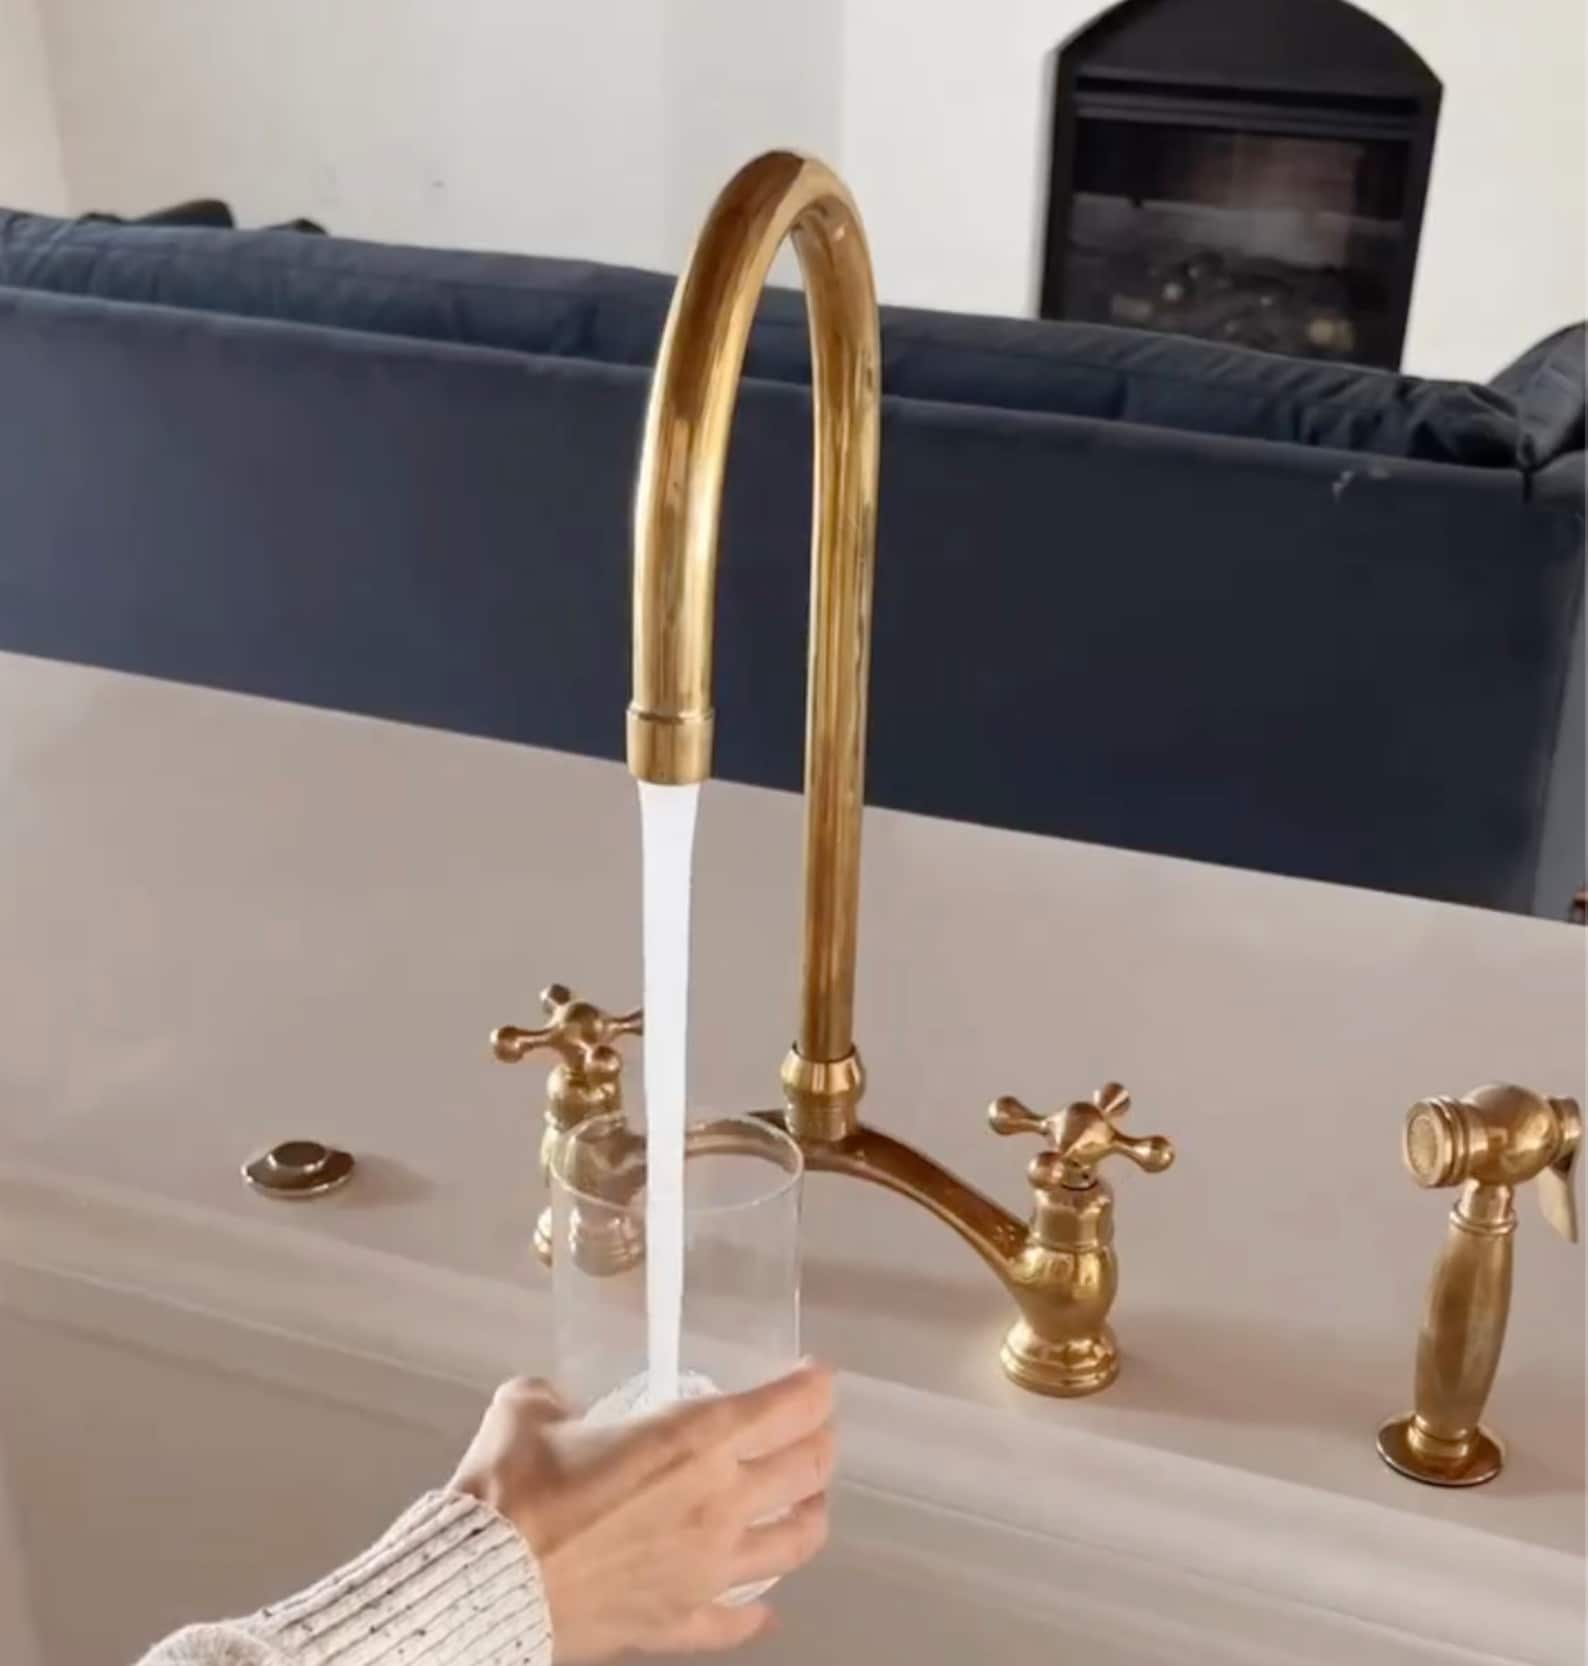 How to Care for Unlacquered Brass Faucets